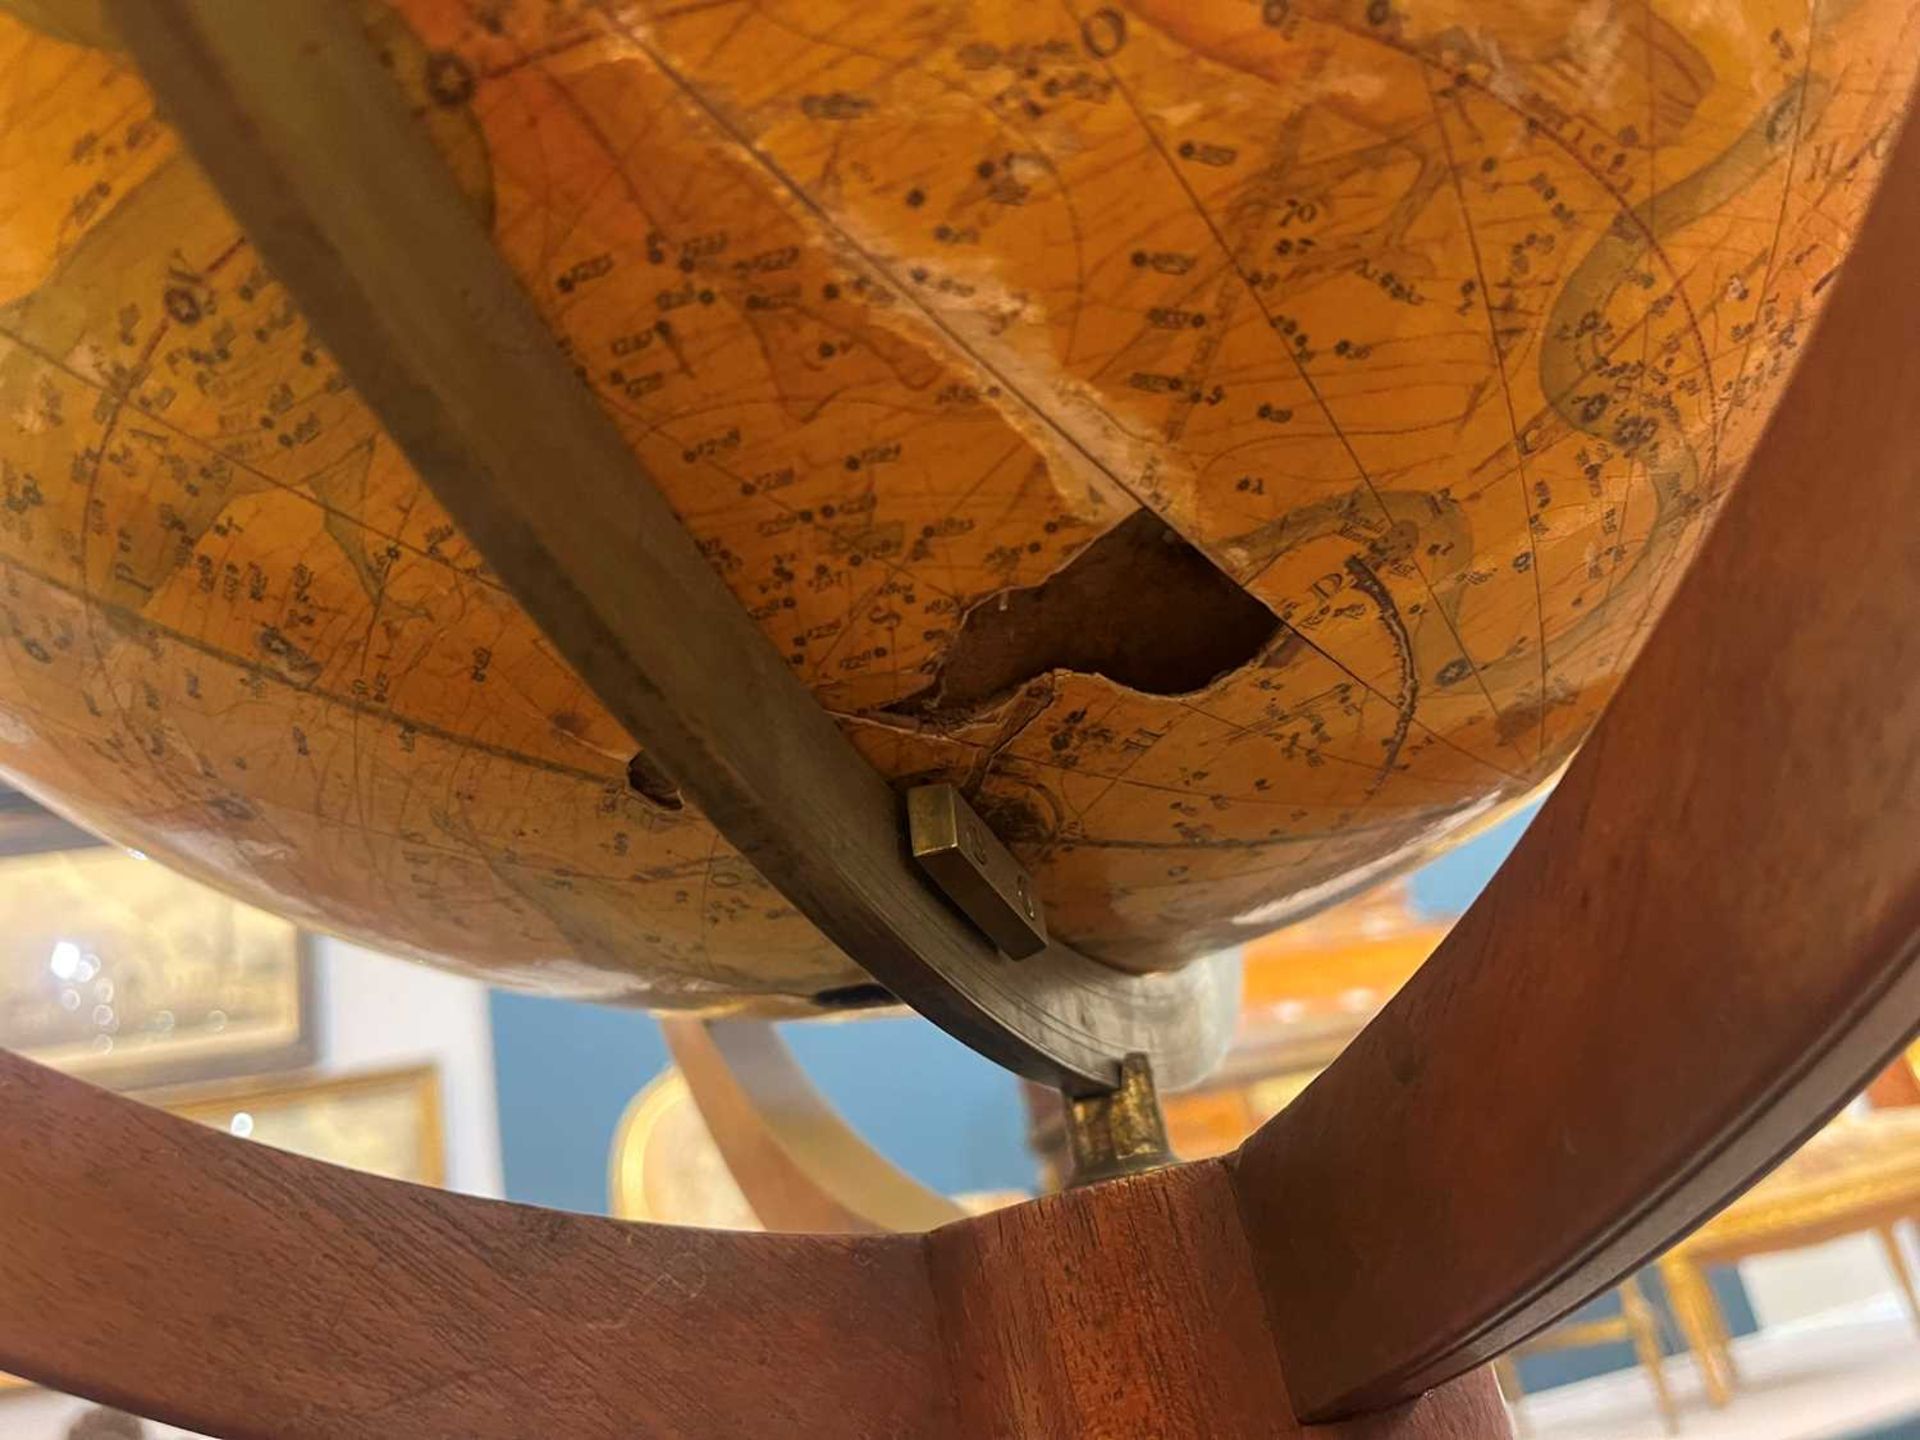 A large celestial library globe by J & W Cary, - Image 37 of 84